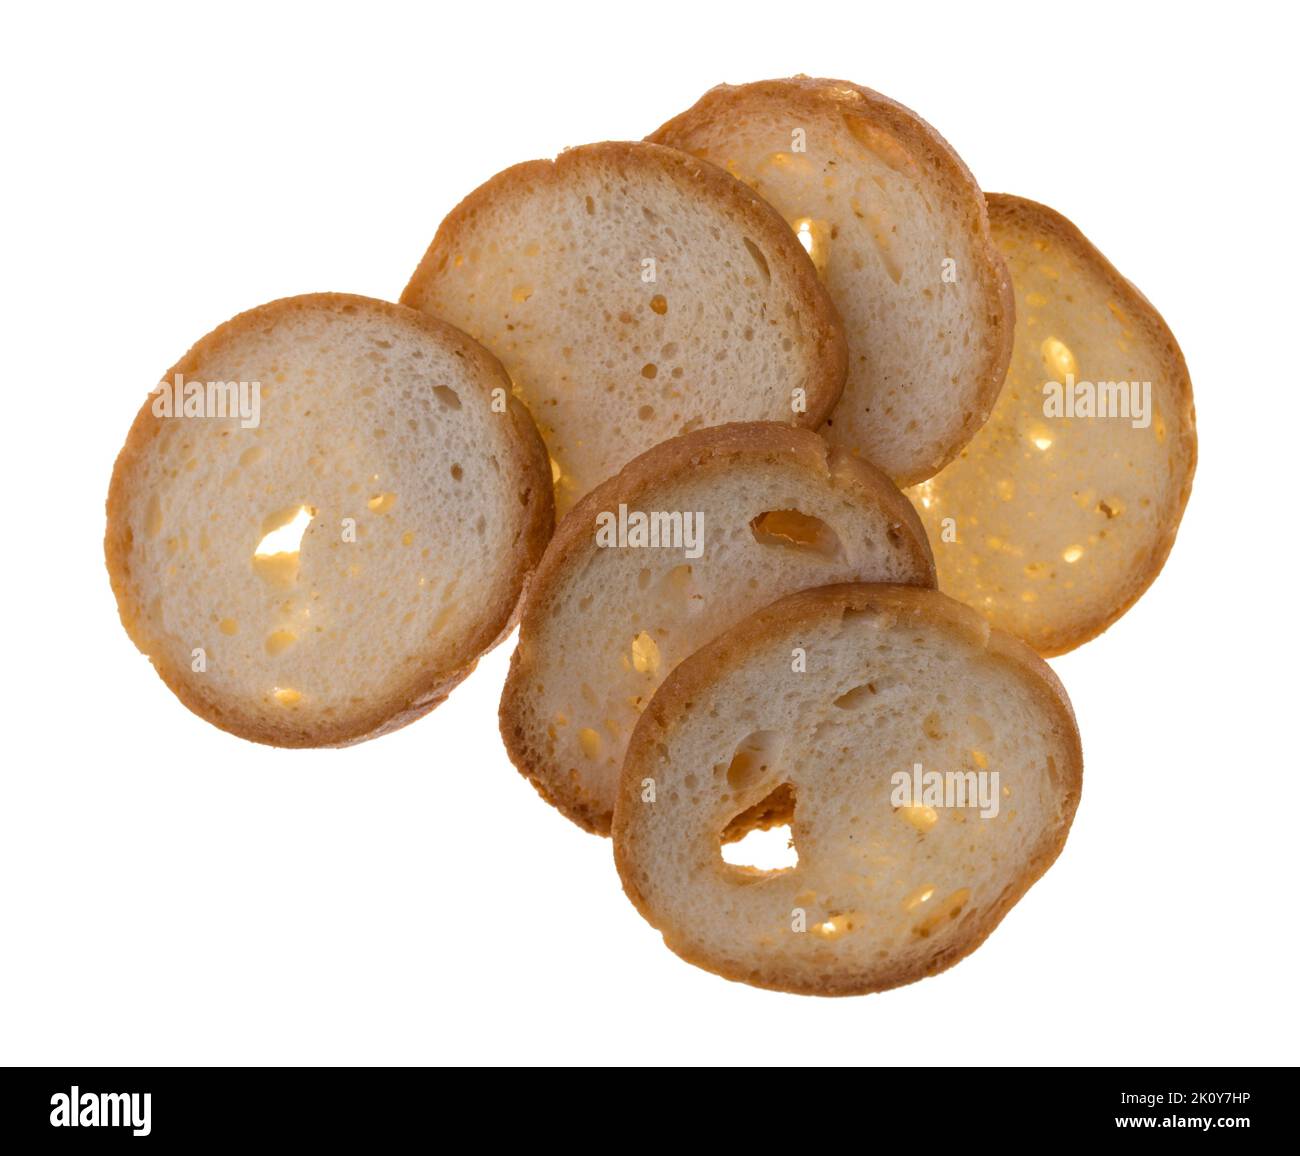 Top view of a group of round toasted crackers isolated on a white background. Stock Photo